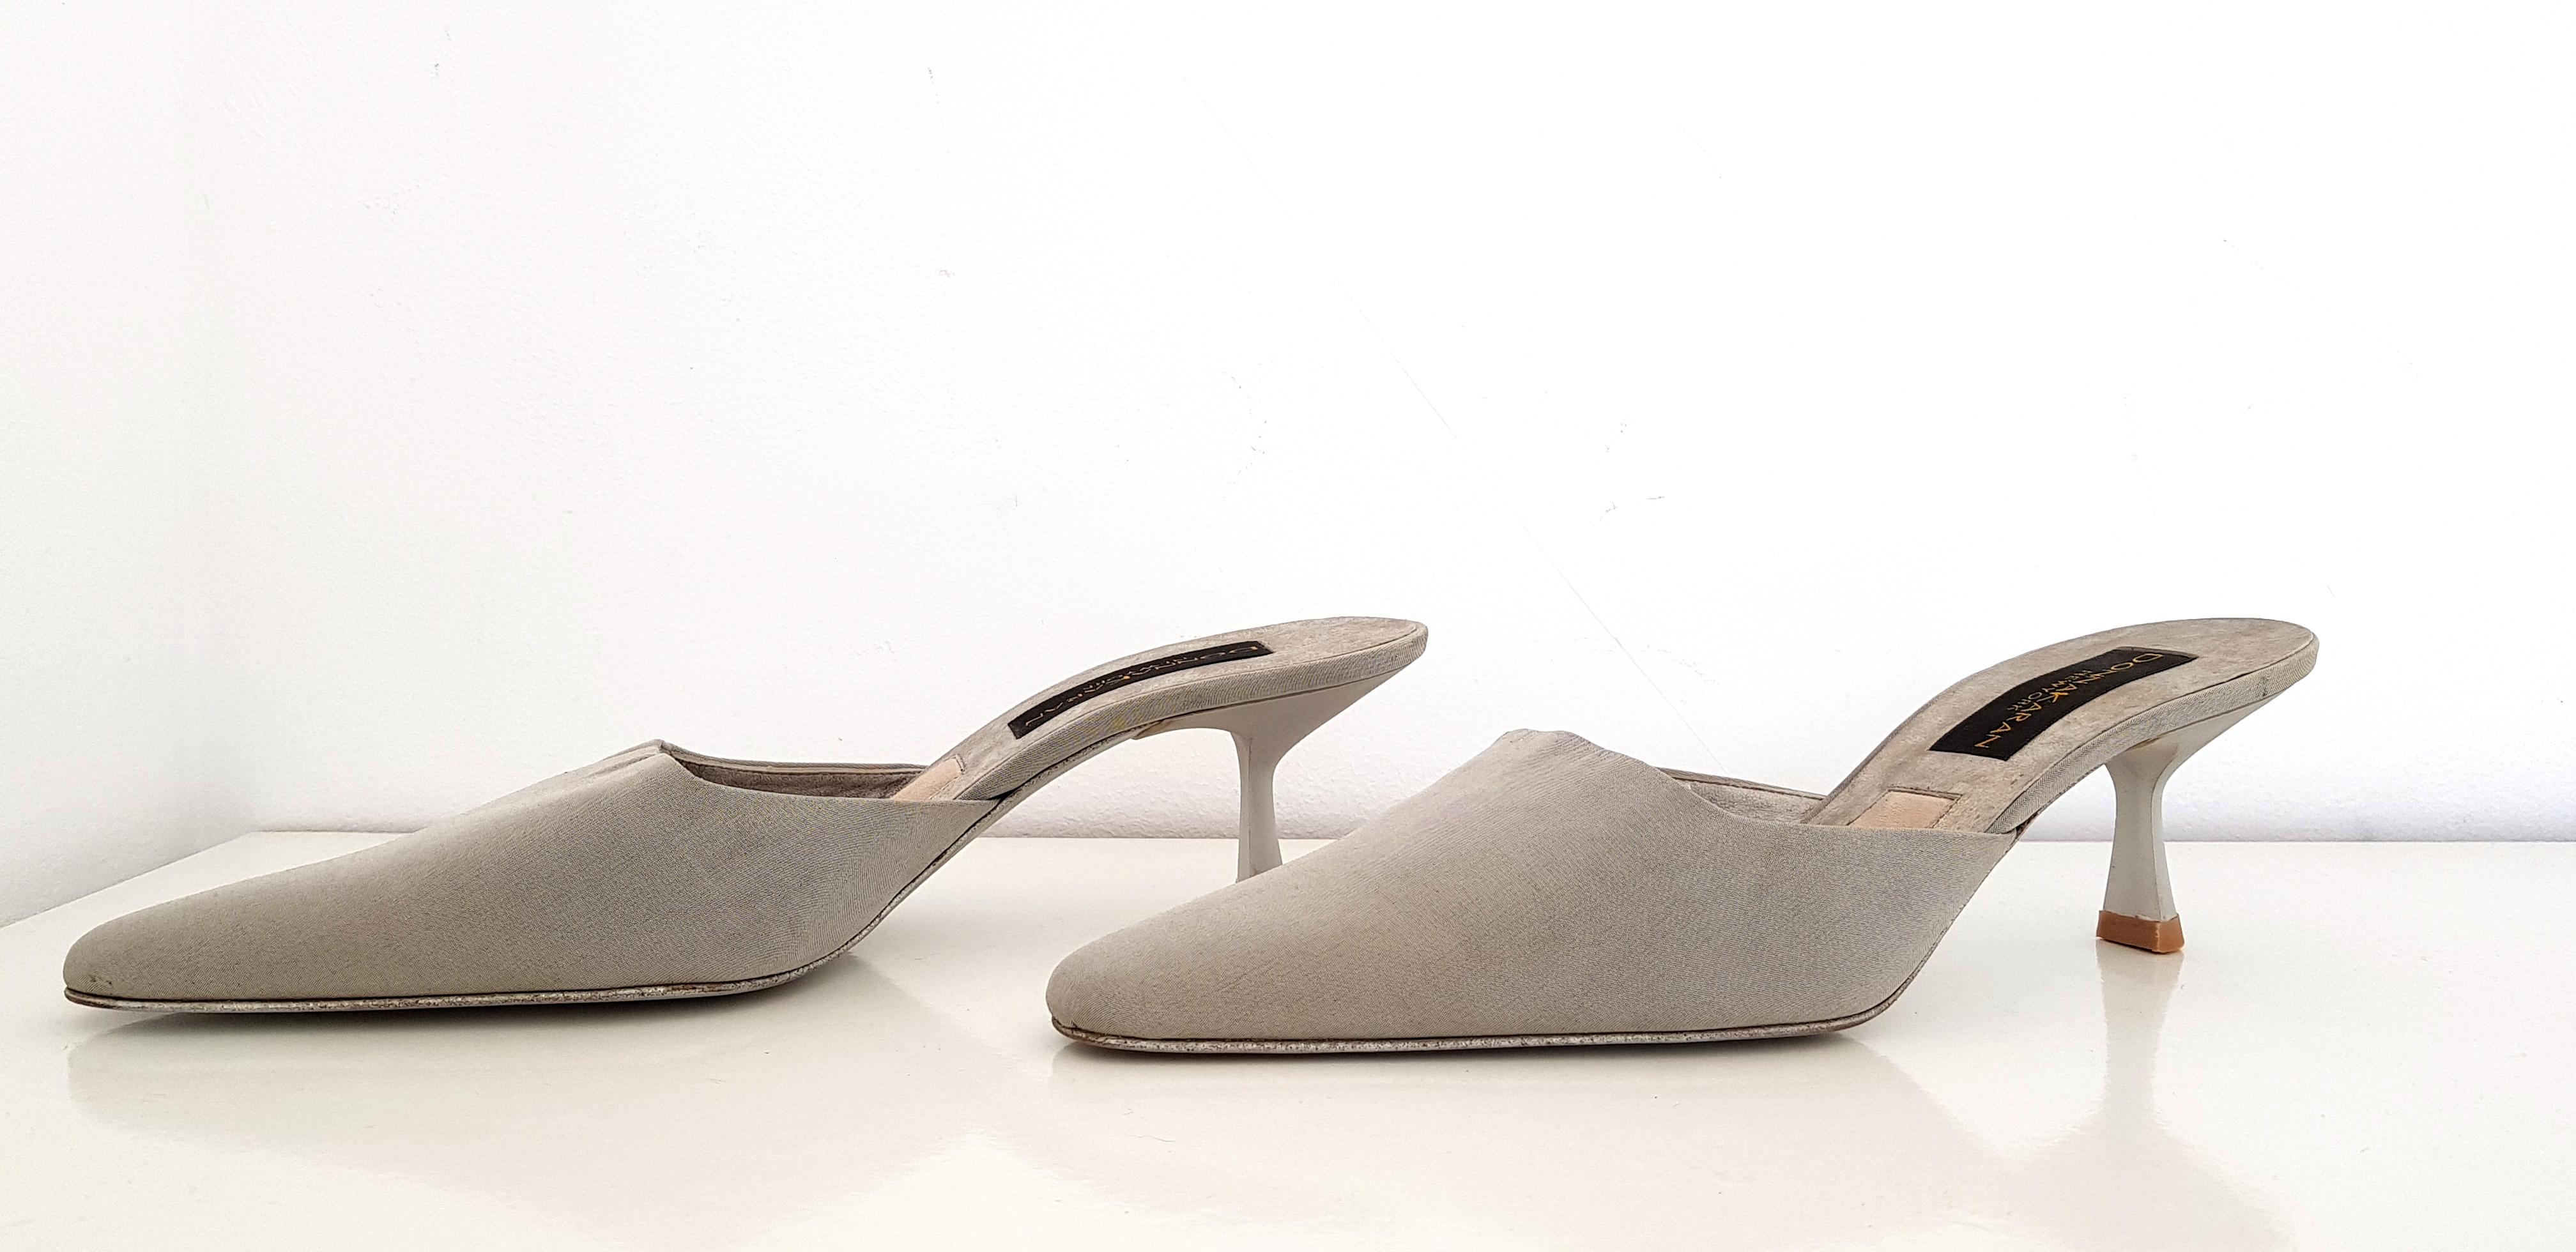 Donna Karan Heels.
Silk and Leather.
Color Gray.
Conditions: Very good.
Heel height: 5 cm
Size: B10 (US)
Made in Italy